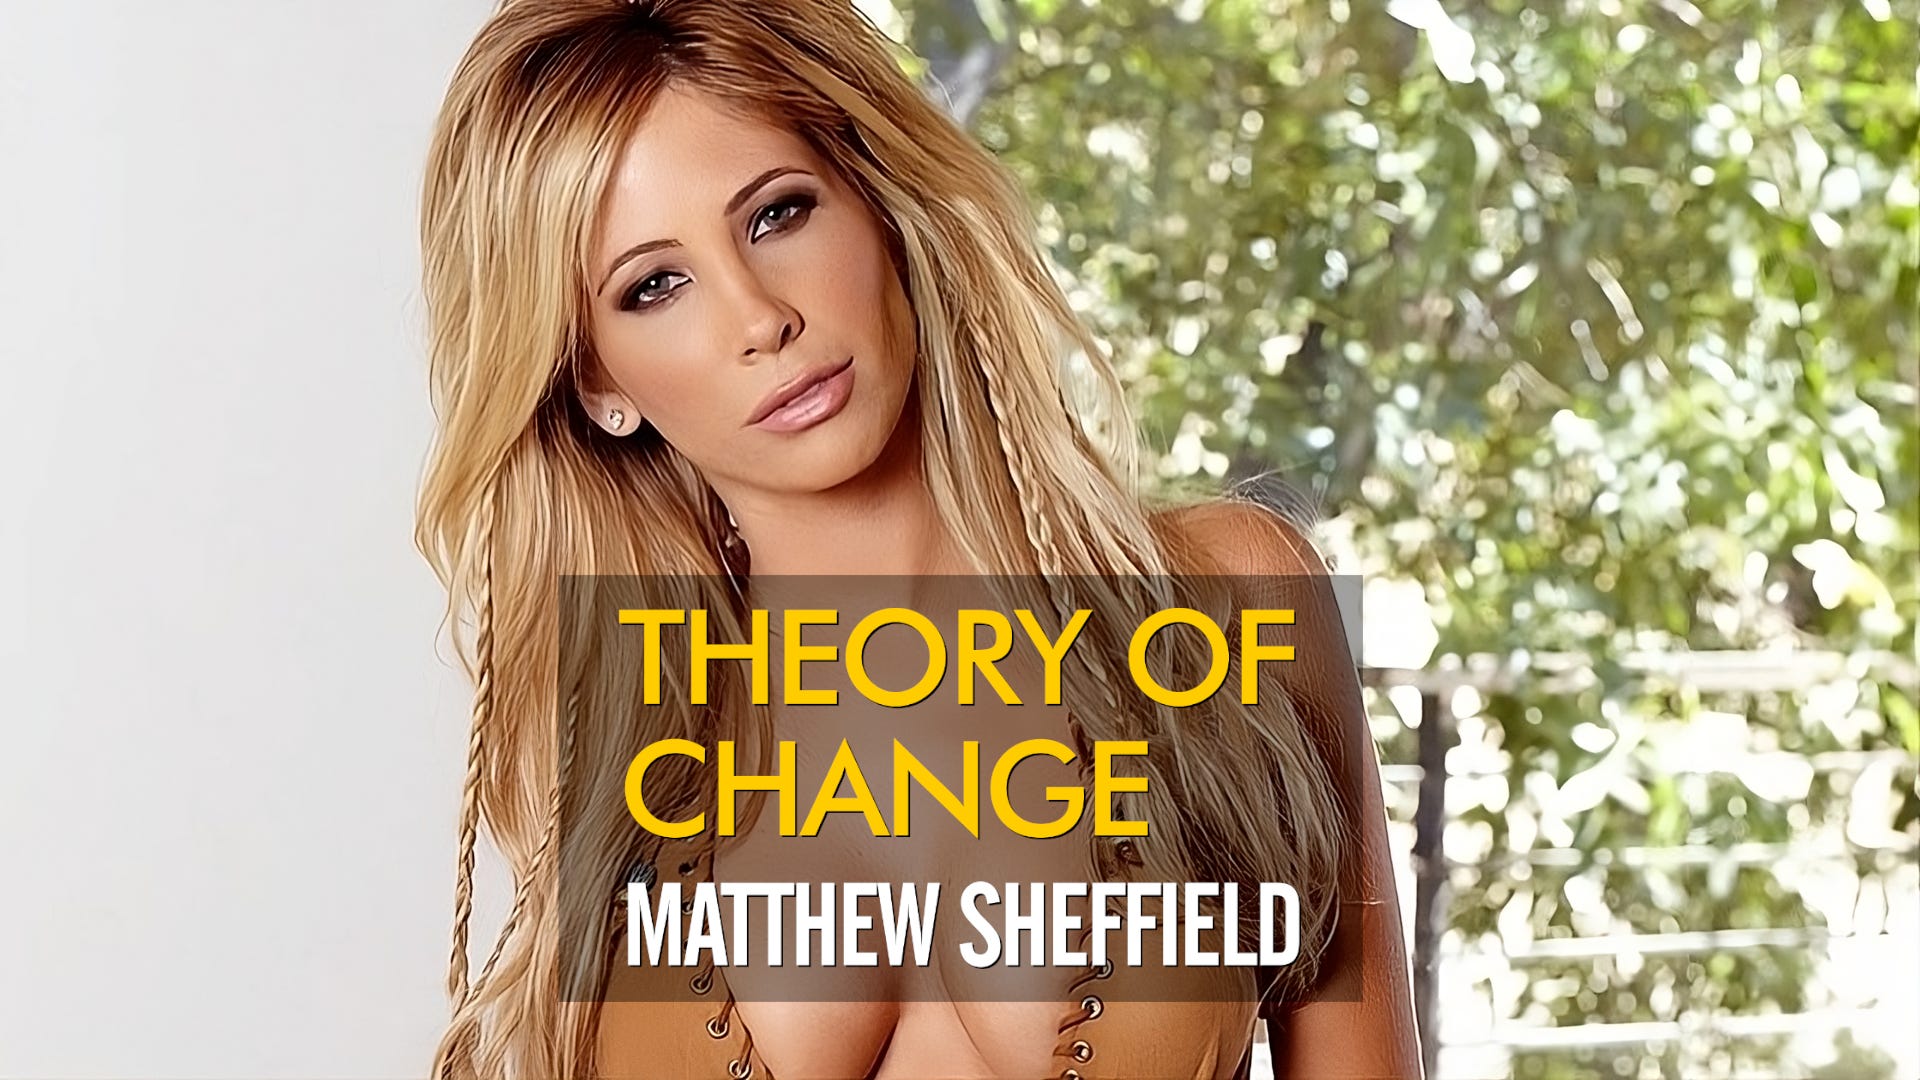 Theory of Change #085: Tasha Reign on sex work, consent, and companionship